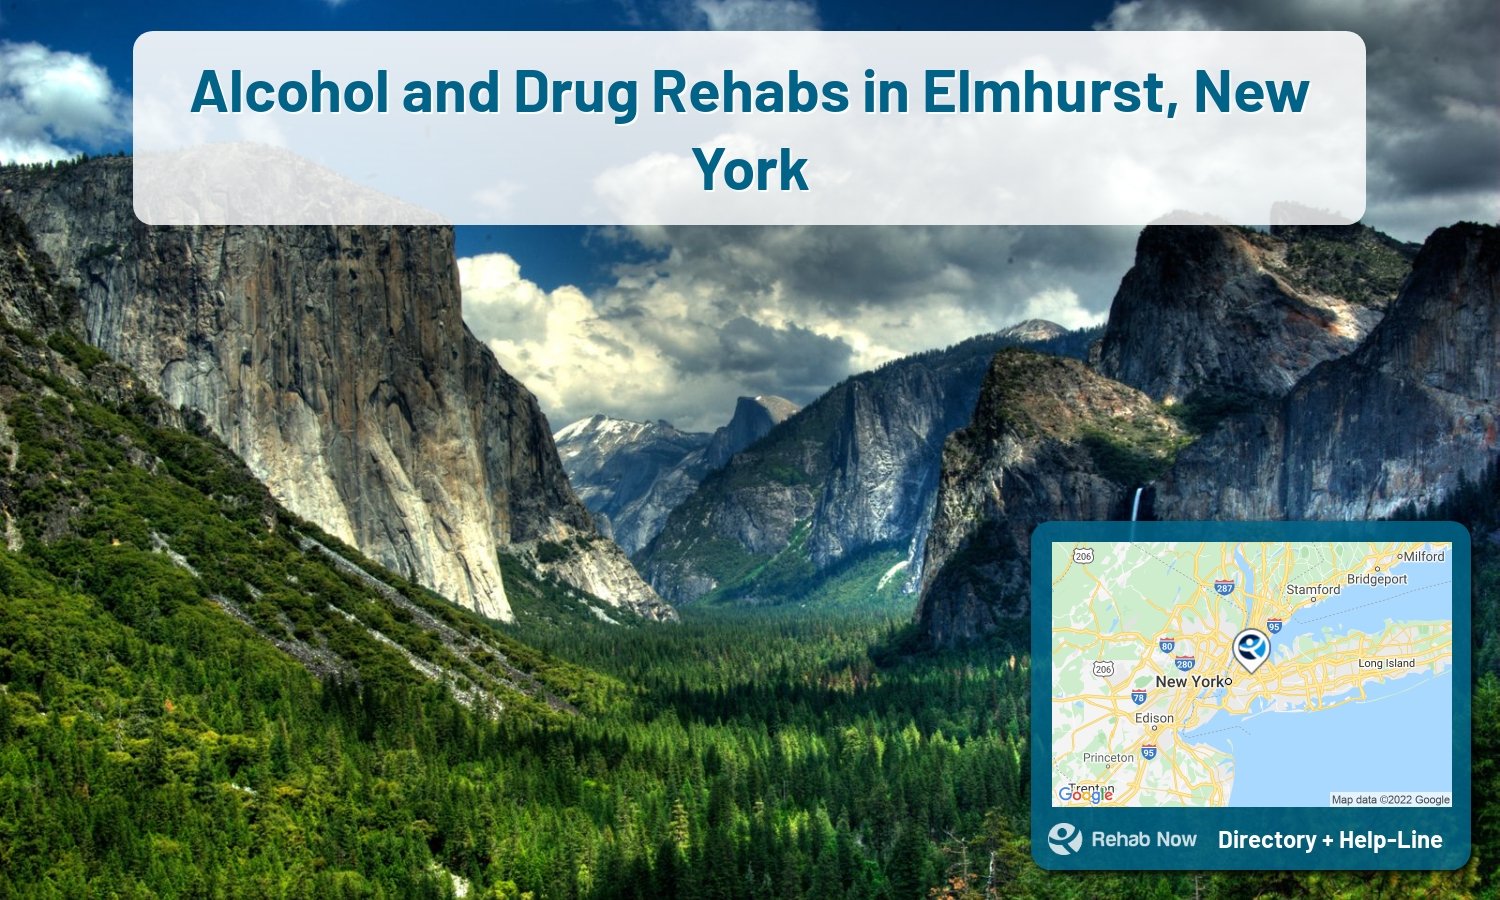 View options, availability, treatment methods, and more, for drug rehab and alcohol treatment in Elmhurst, New York